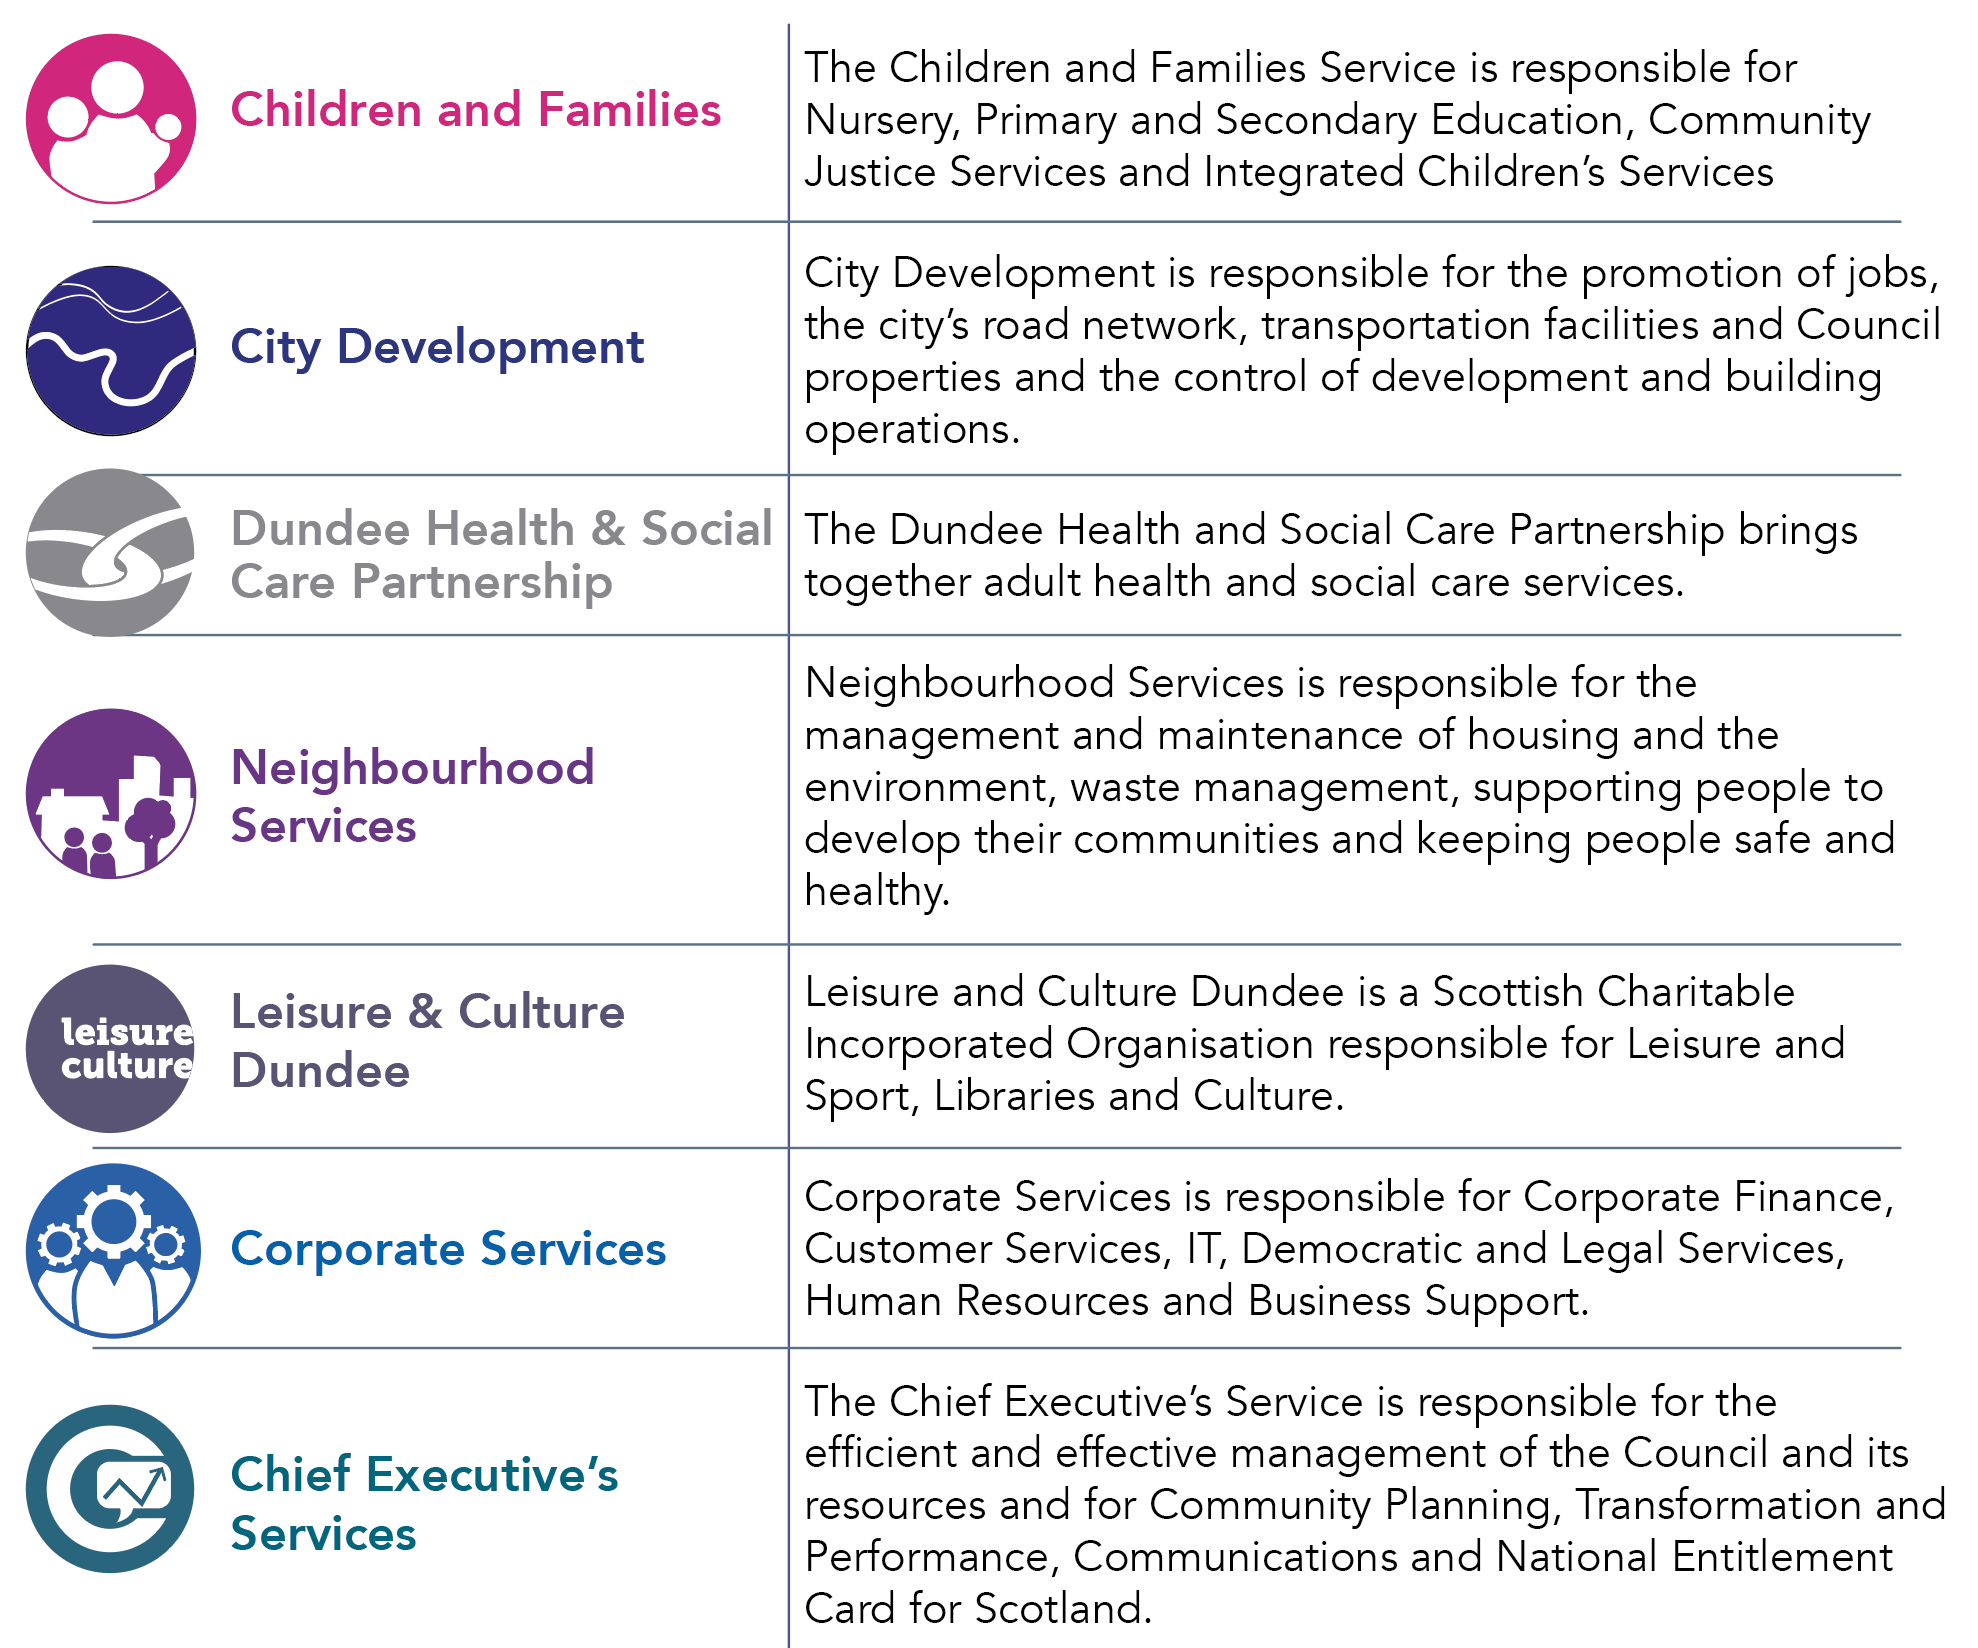 The image contains a table of all the services within the council and a brief description of responsibility